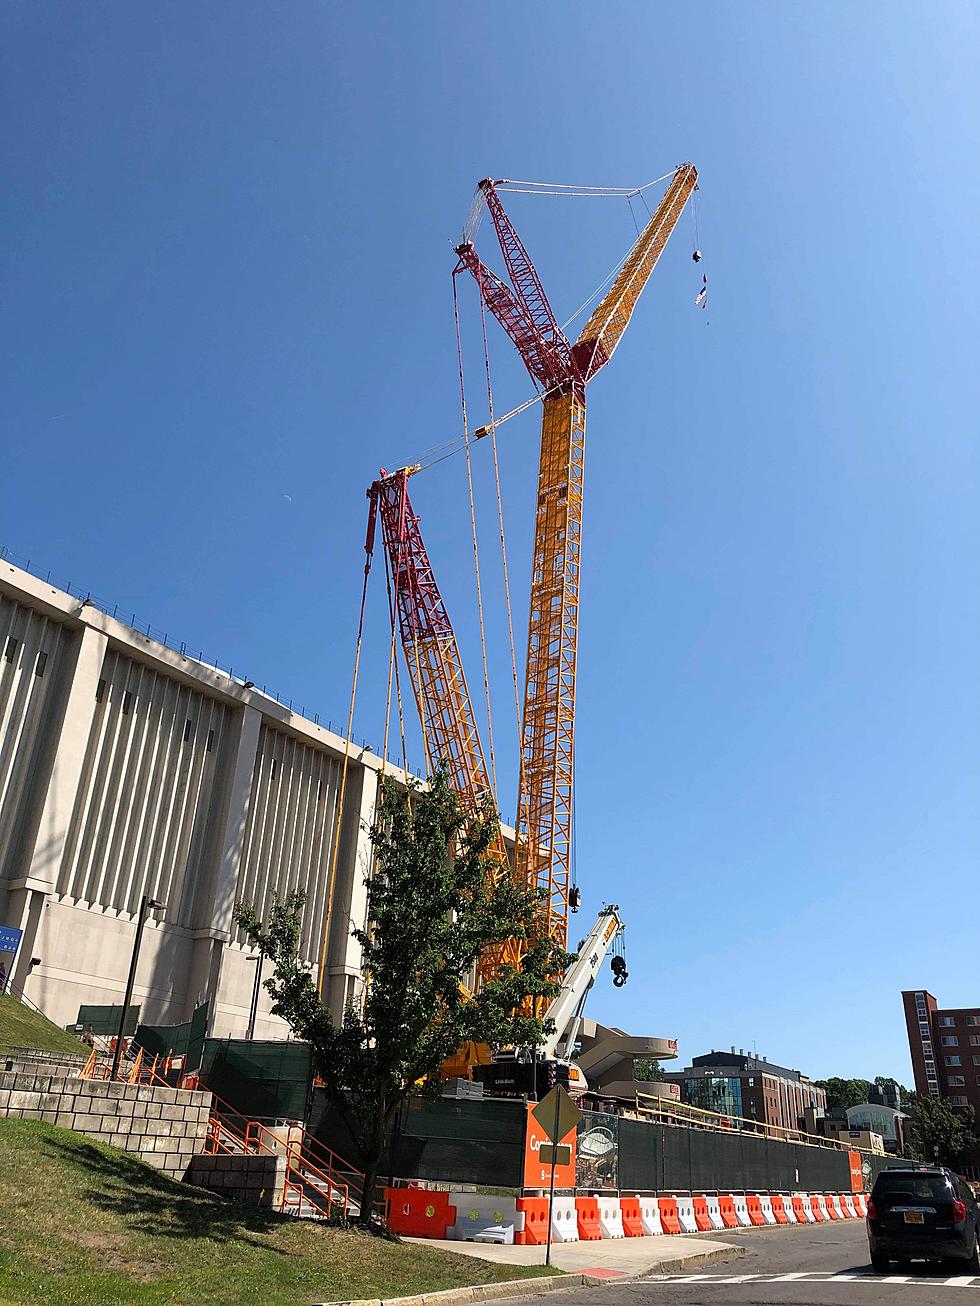 One of the World’s Tallest Cranes Rises in Syracuse